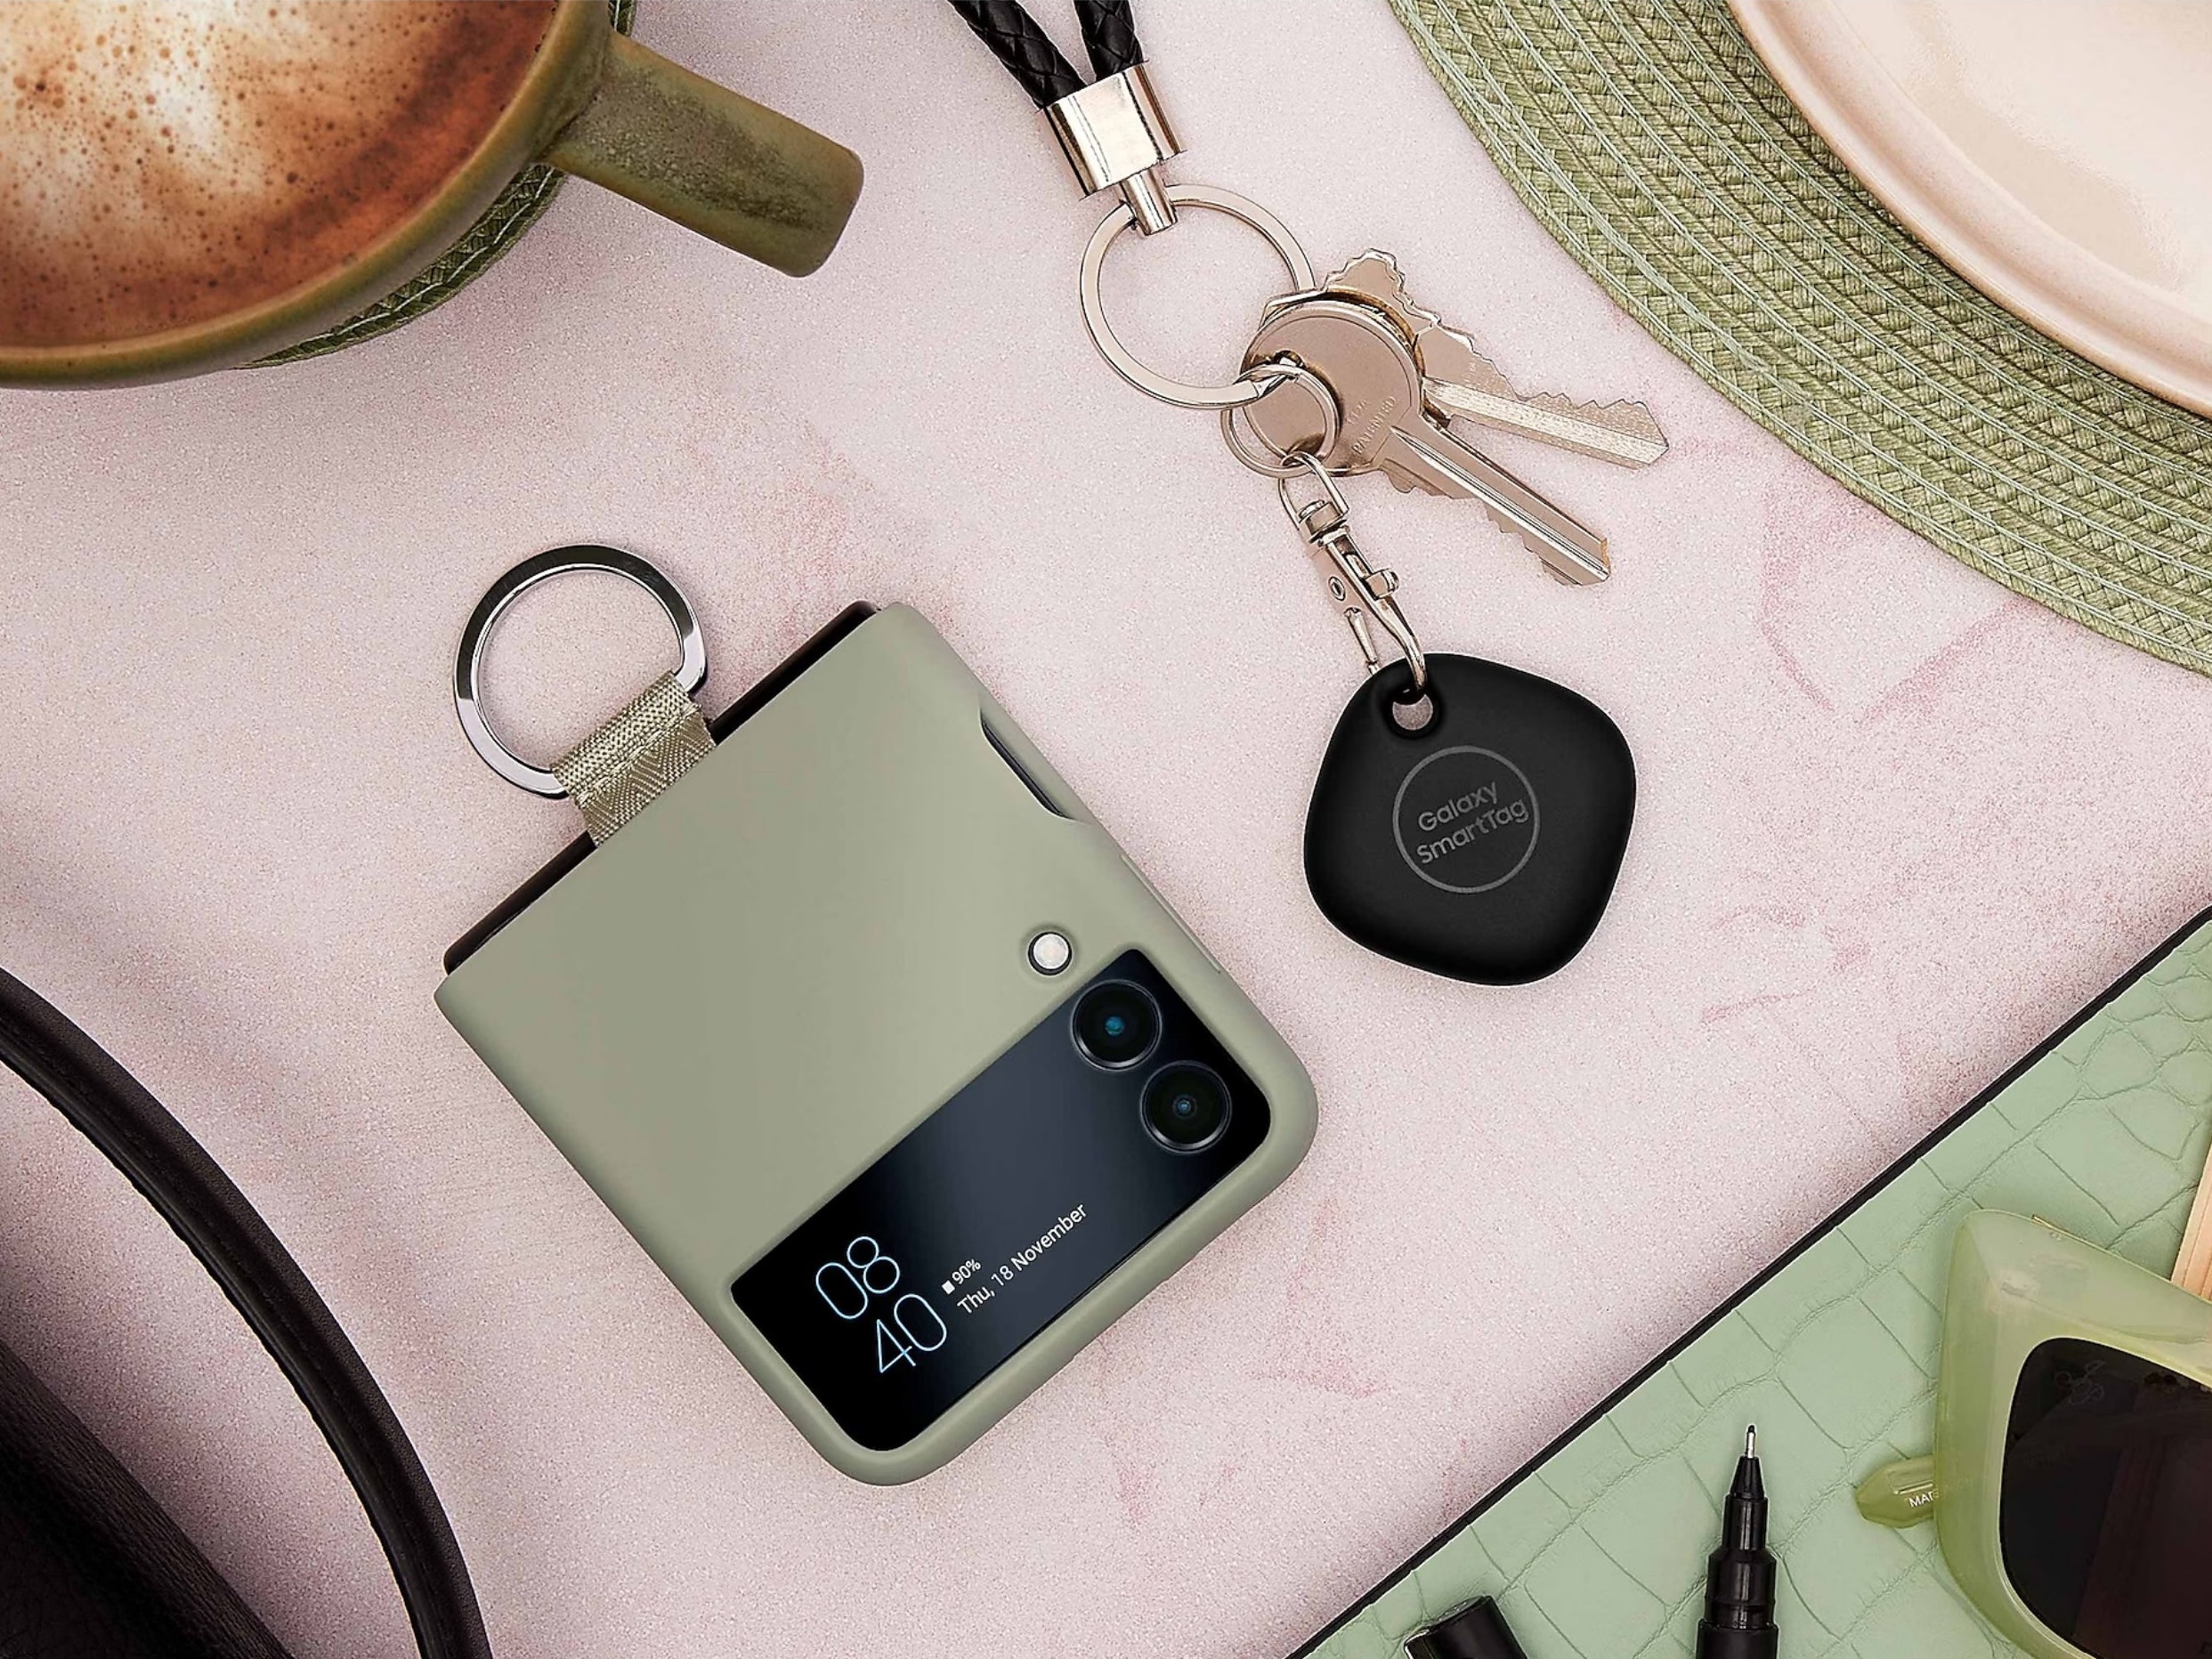 Update] Introducing the New Galaxy SmartTag+: The Smart Way to